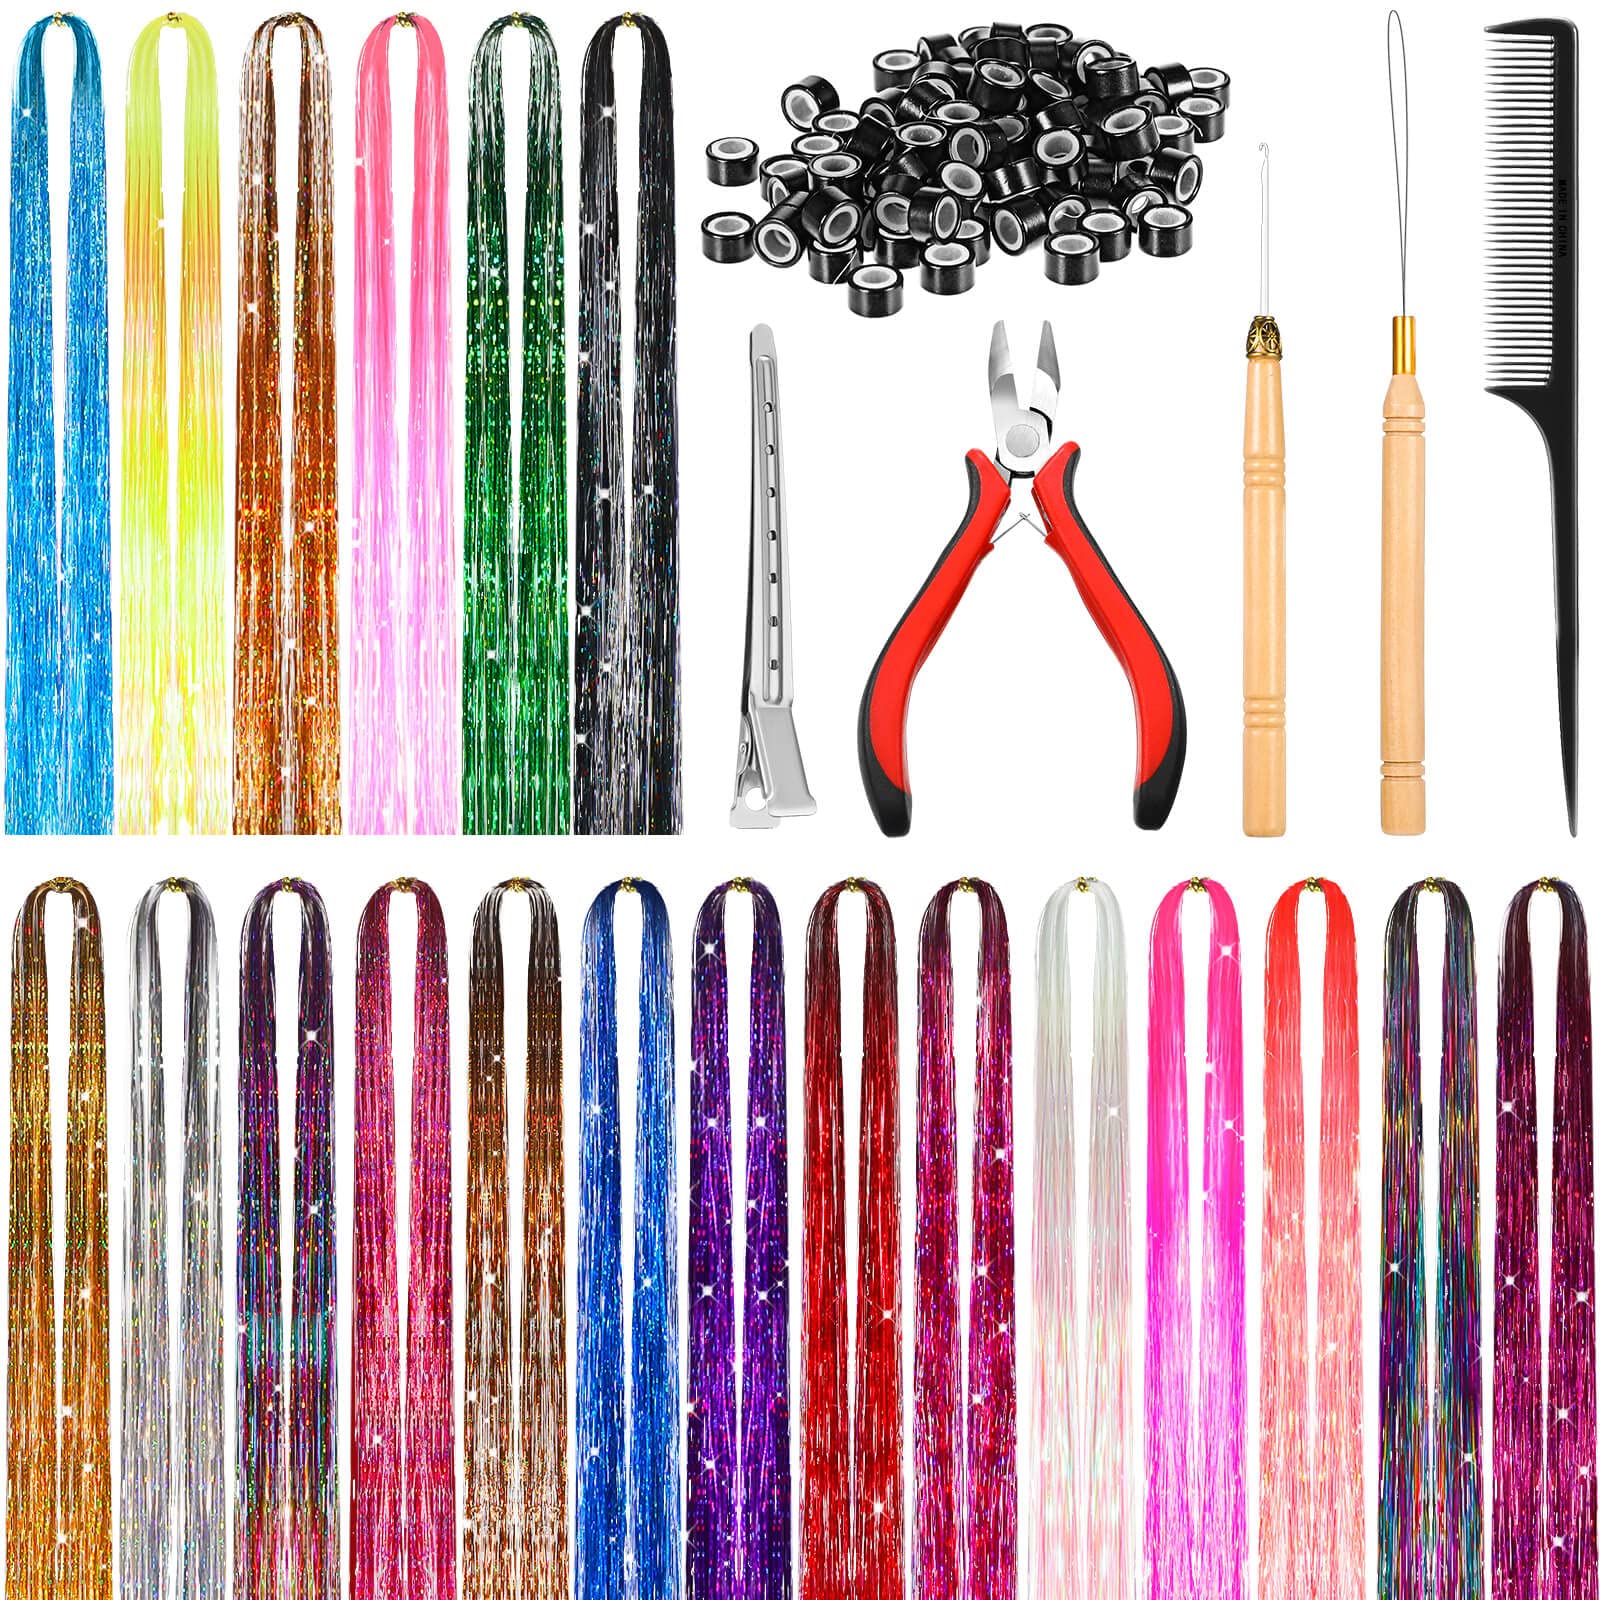 Hair Tinsel Kit, 10 Colors Tinsel Hair Extensions with Tools (a Plier+a  Pulling Needle+200pcs Silicon Lined Beads), Glittery Fairy Sparkingly  Hairpiece for Party Halloween Christmas New Year 10 colors( Black,Blue,  Red, Pur…